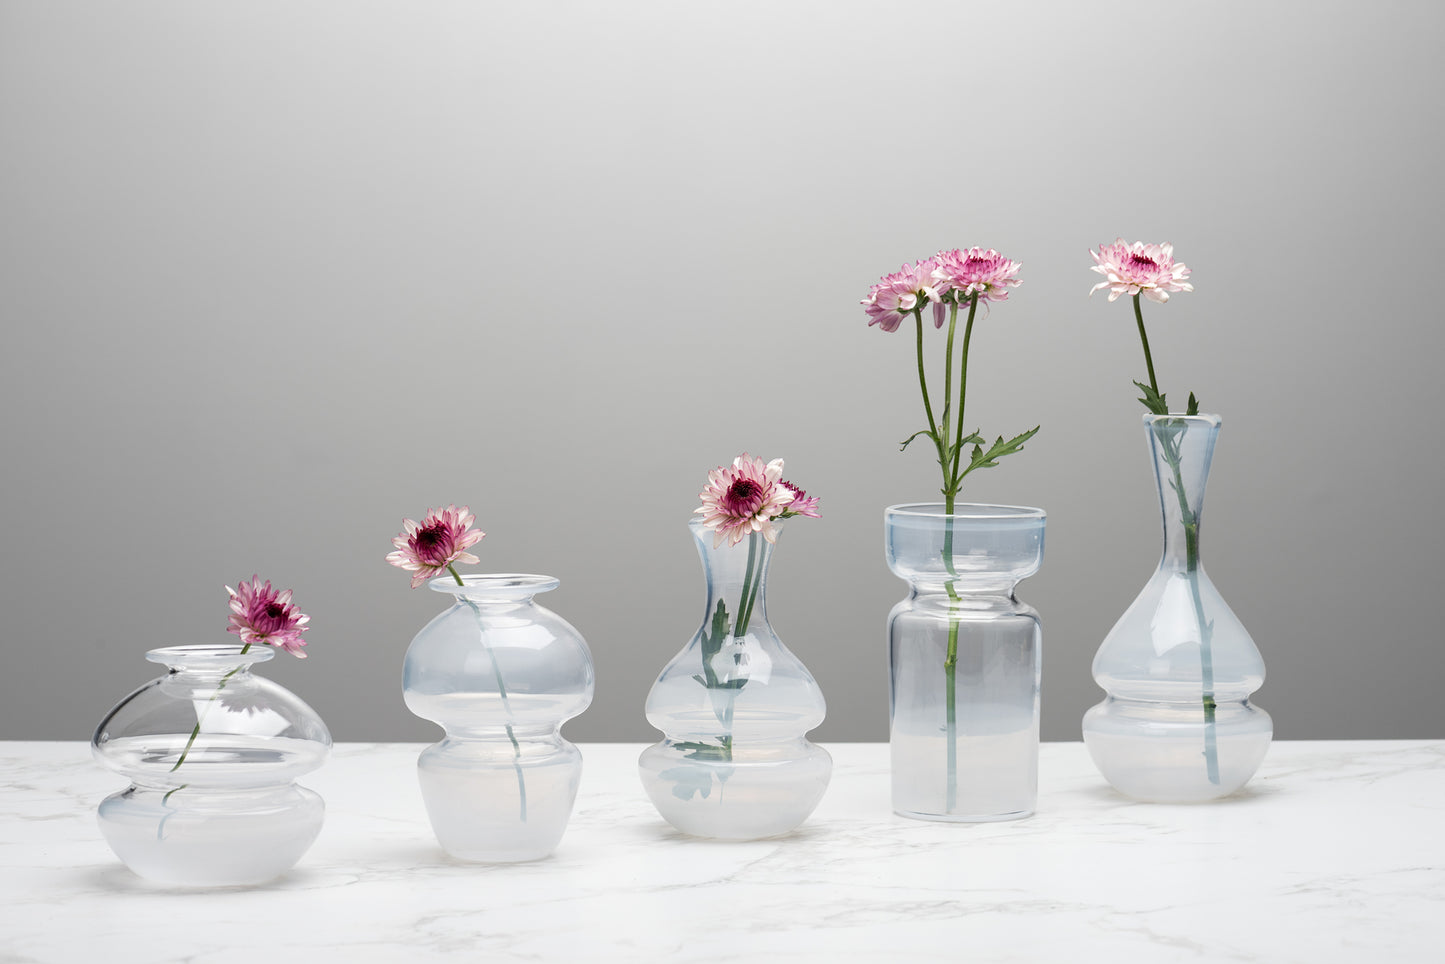 A line of white bud vases holding pink flower blooms. Image by Loam